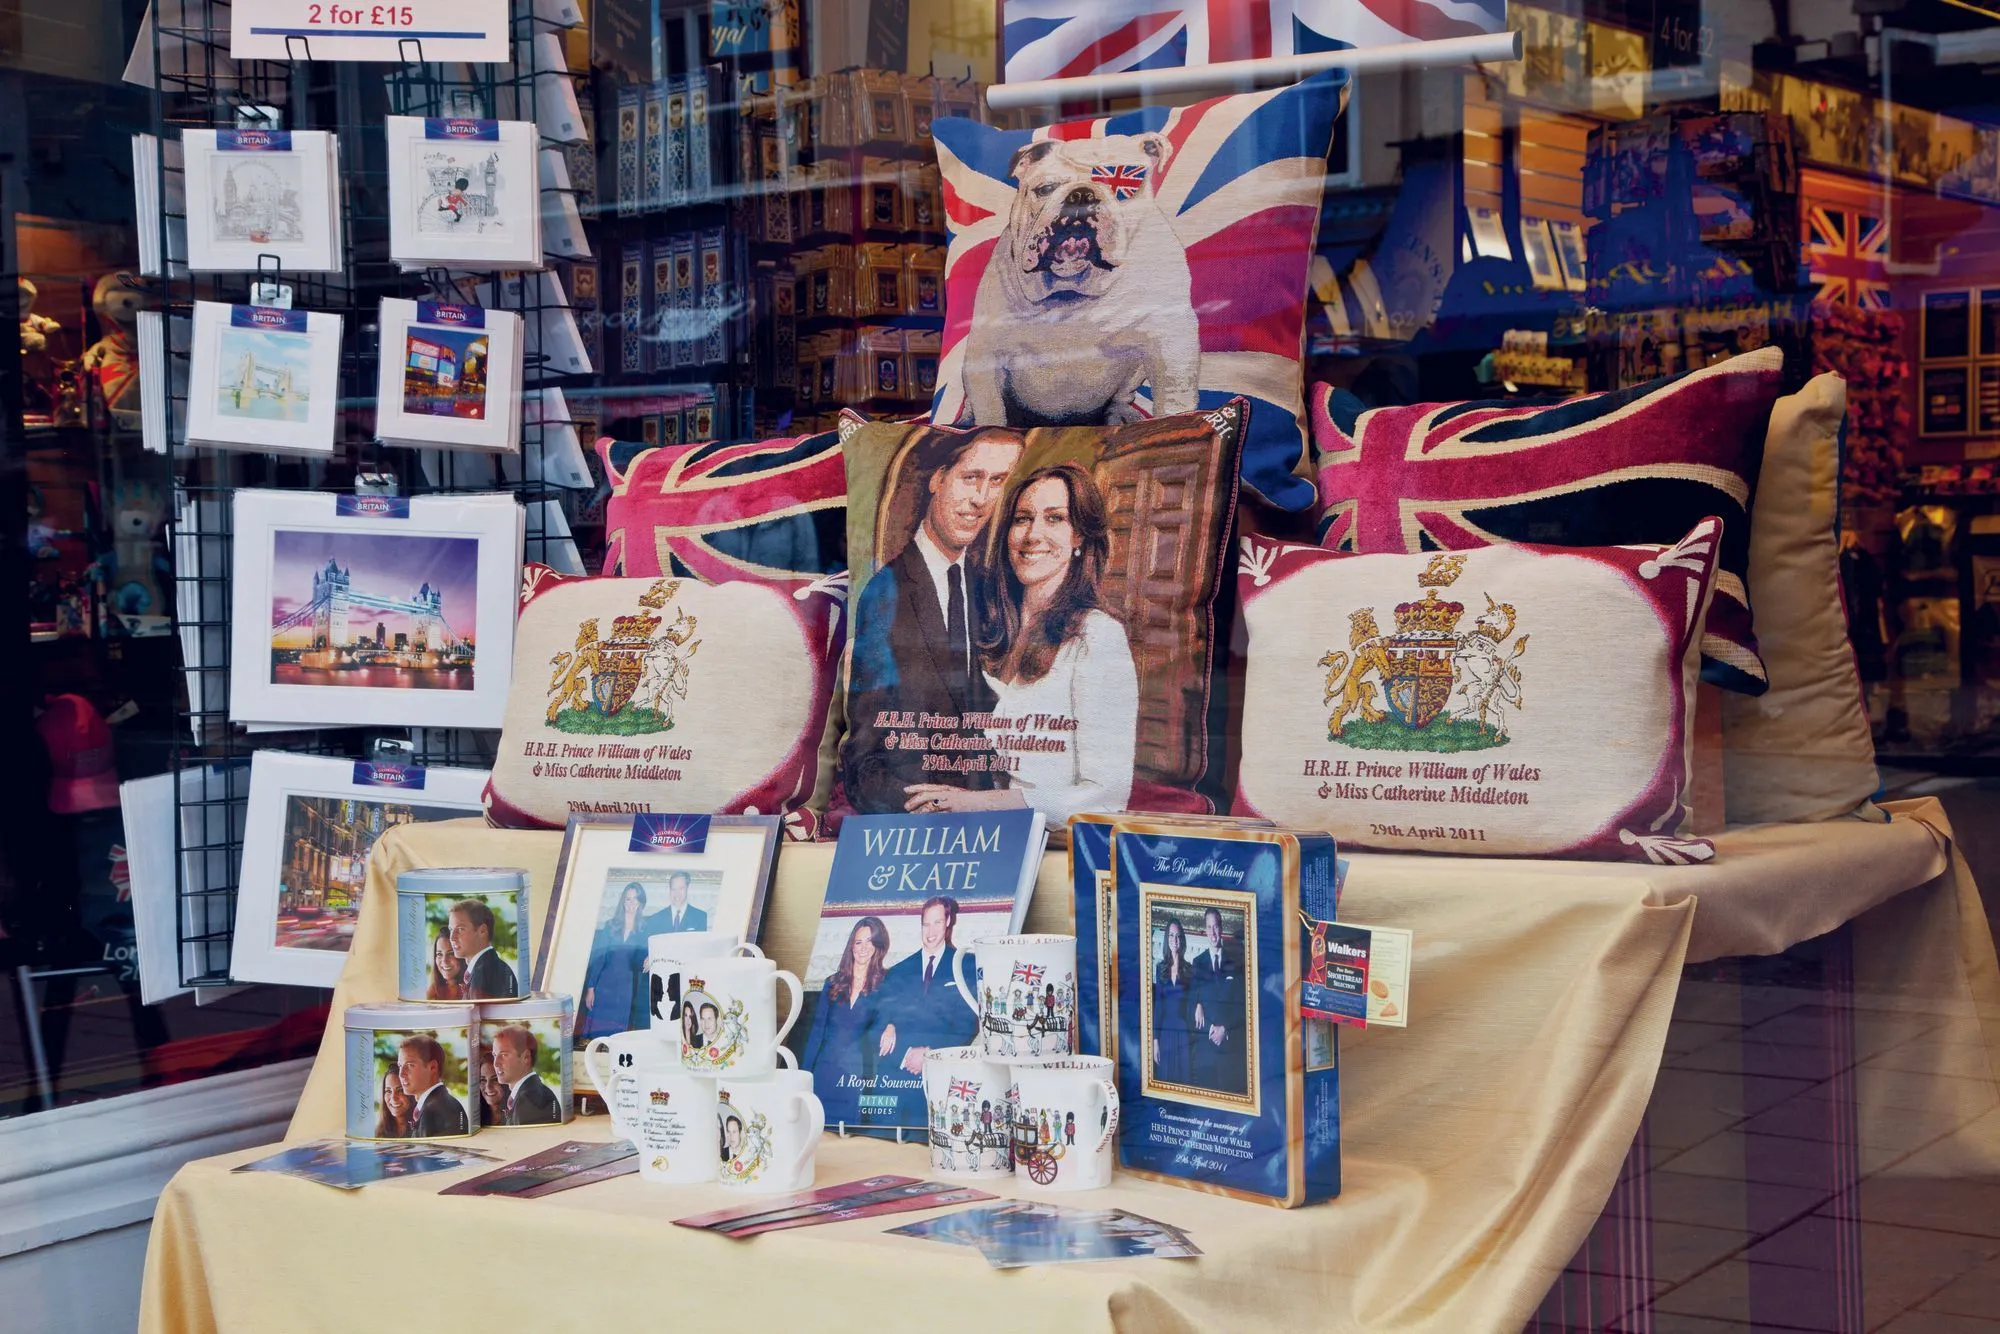 A souvenir shop window in Windsor, by Anna Stowe, 2011.